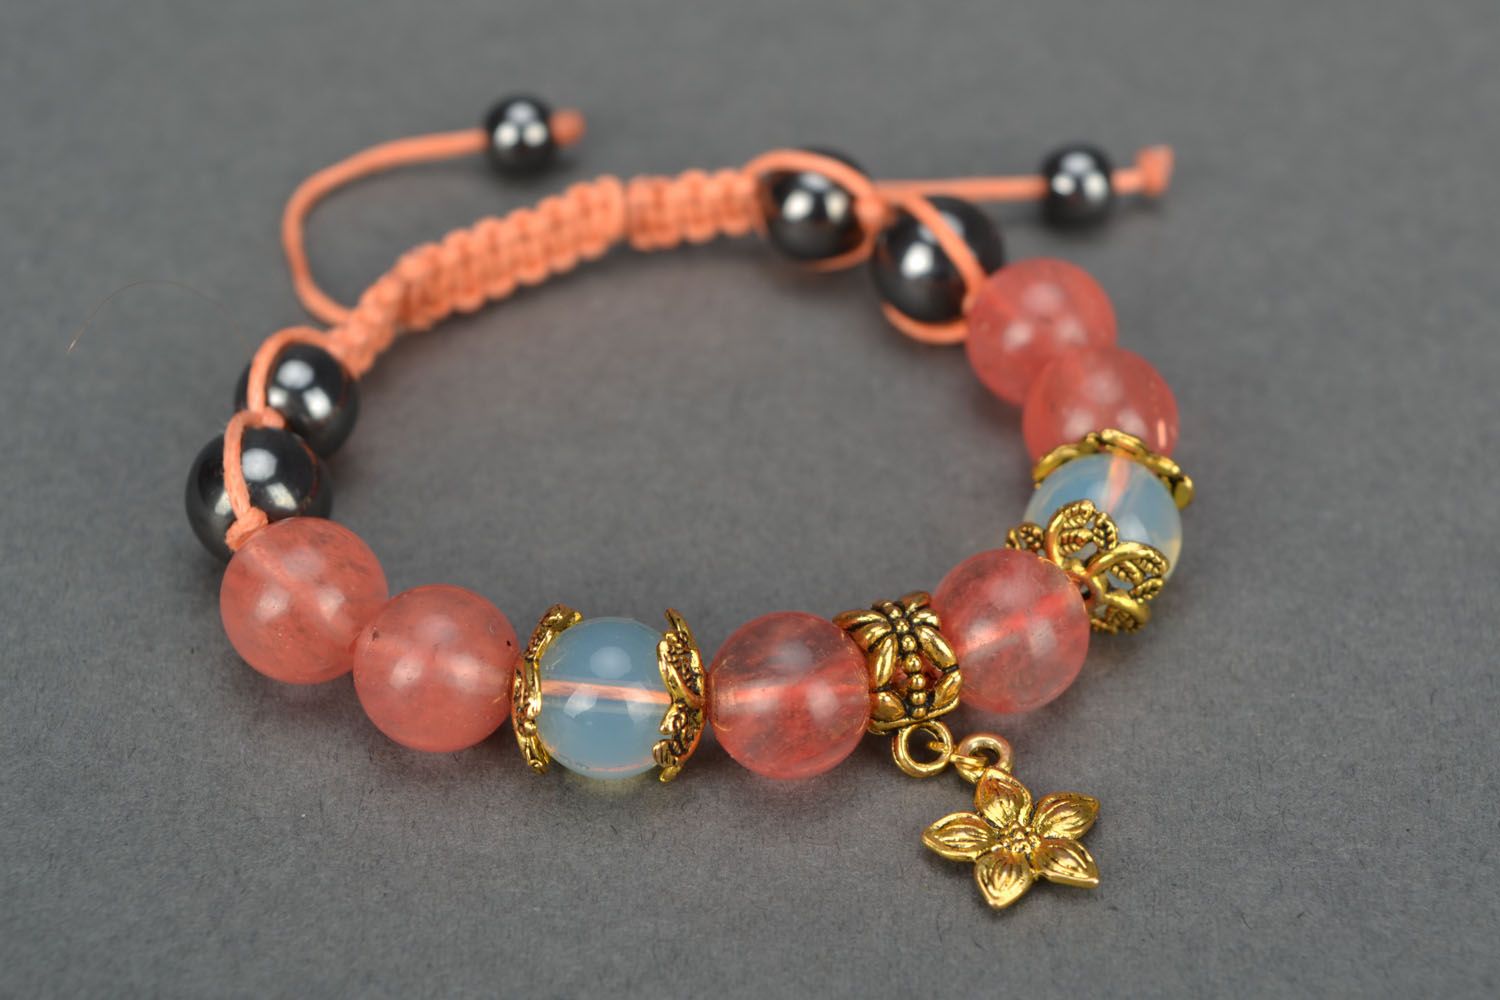 Handmade bracelet with beads and charms photo 3